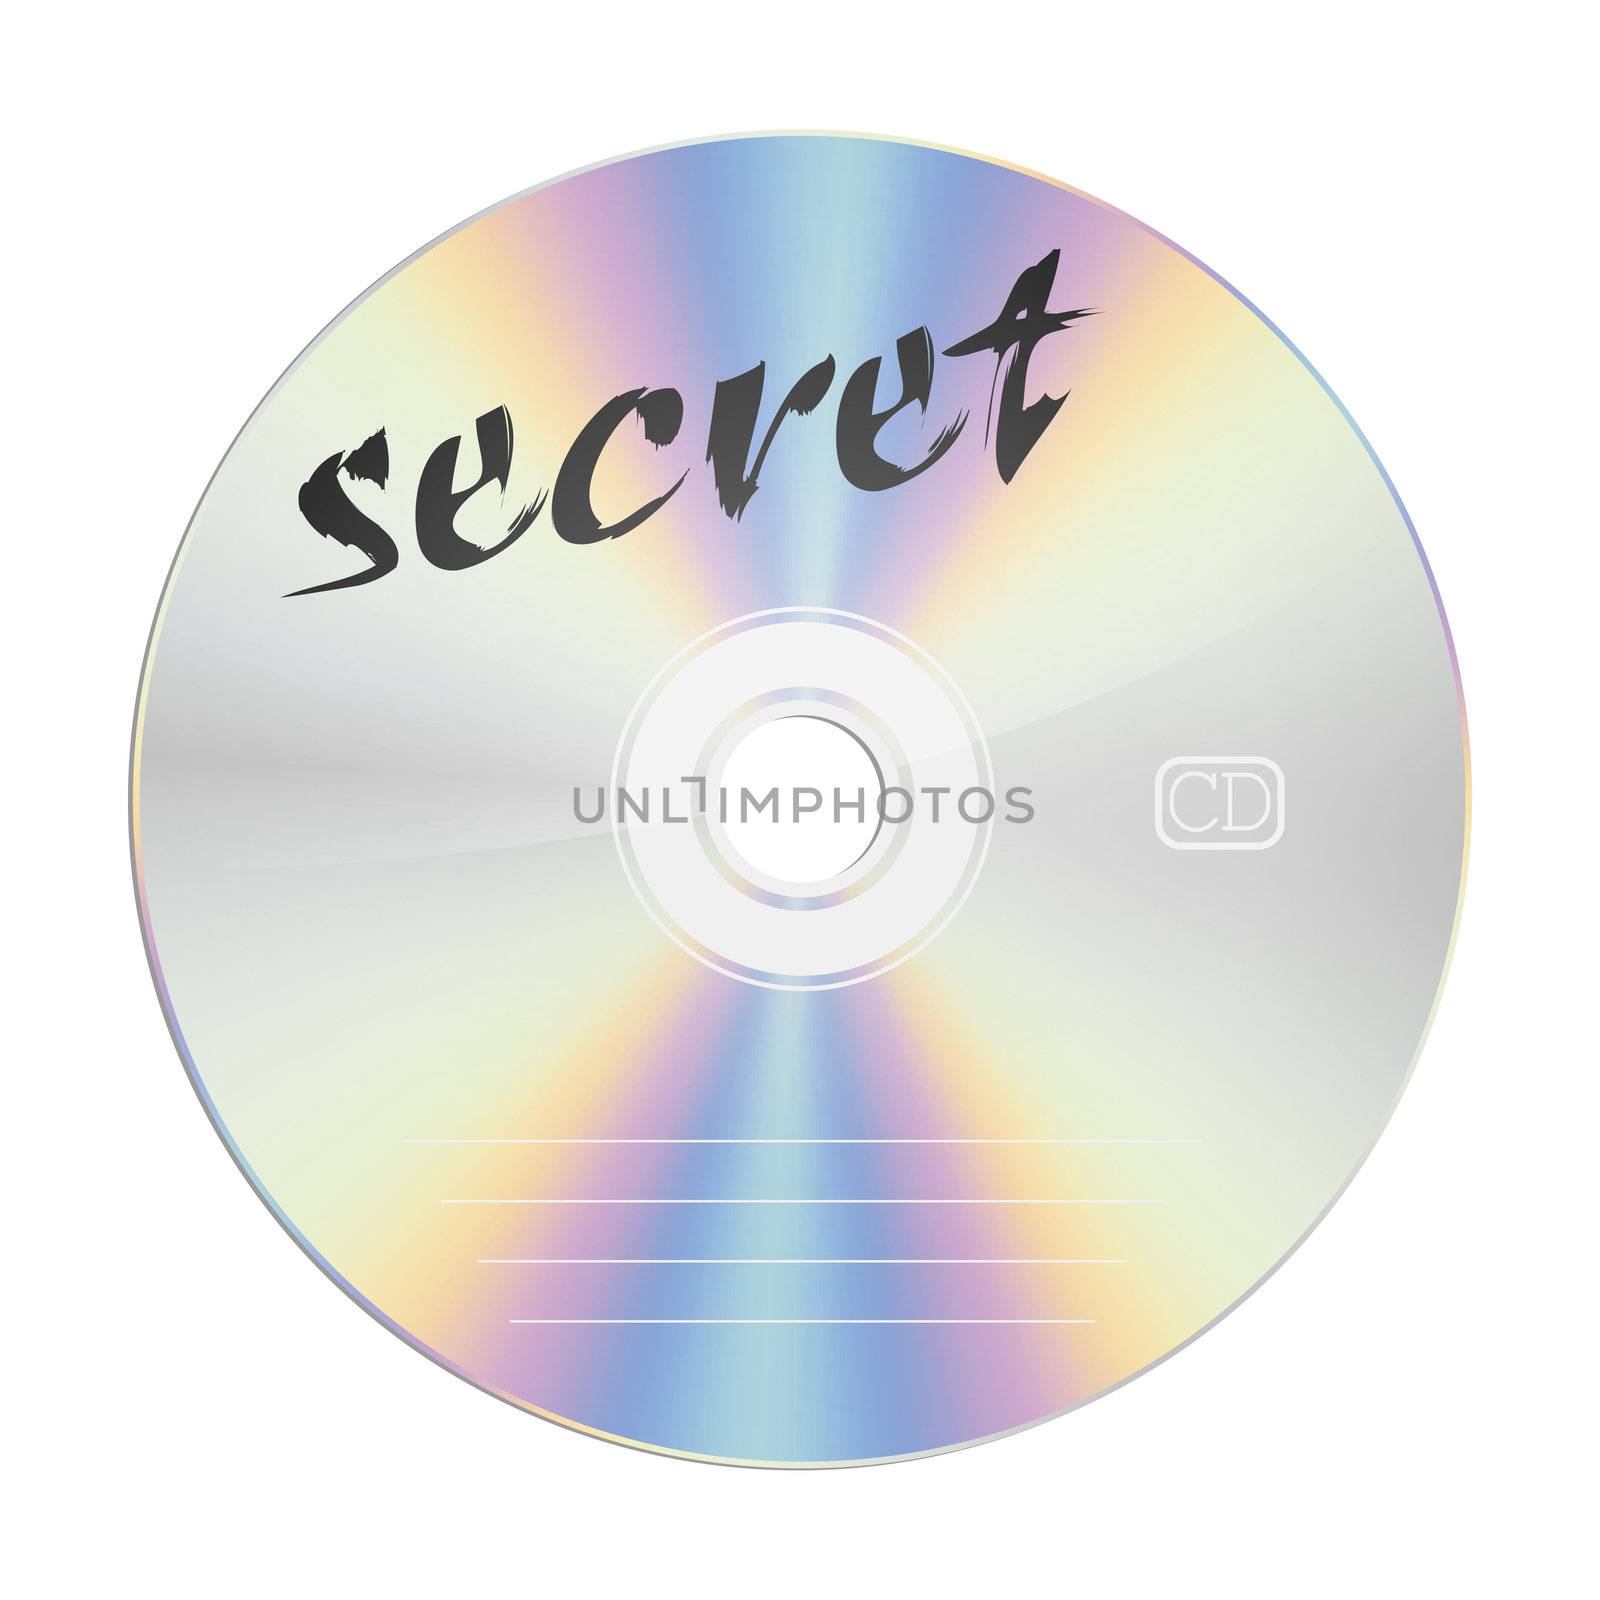 An image of a security compact disc secret